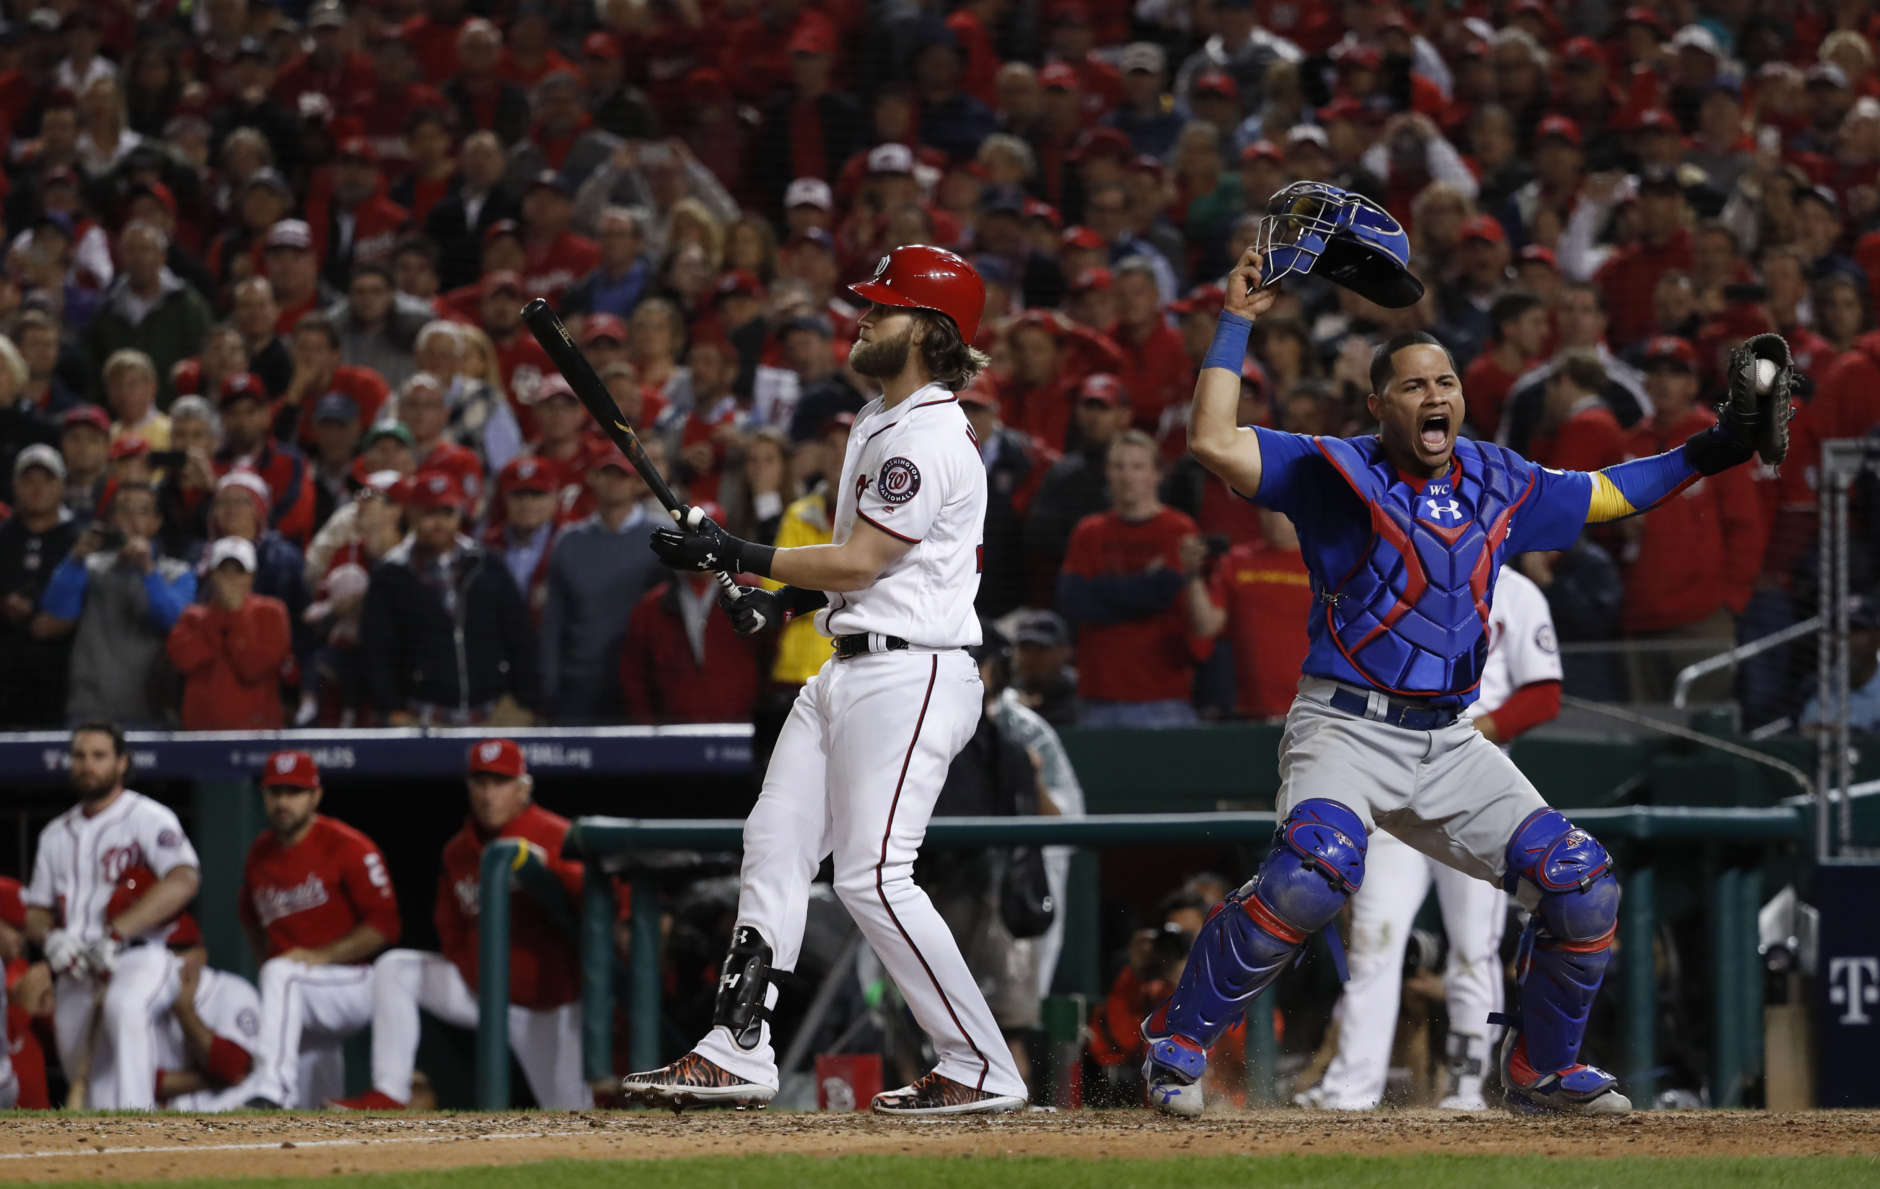 Chicago Cubs catcher Willson Contreras begins to celebrate after Washington Nationals' Bryce Harper struck out swinging in the ninth inning to end Game 5 of a baseball National League Division Series, at Nationals Park, early Friday, Oct. 13, 2017, in Washington. The Cubs advanced to the NLCS with a 9-8 win. (AP Photo/Pablo Martinez Monsivais)